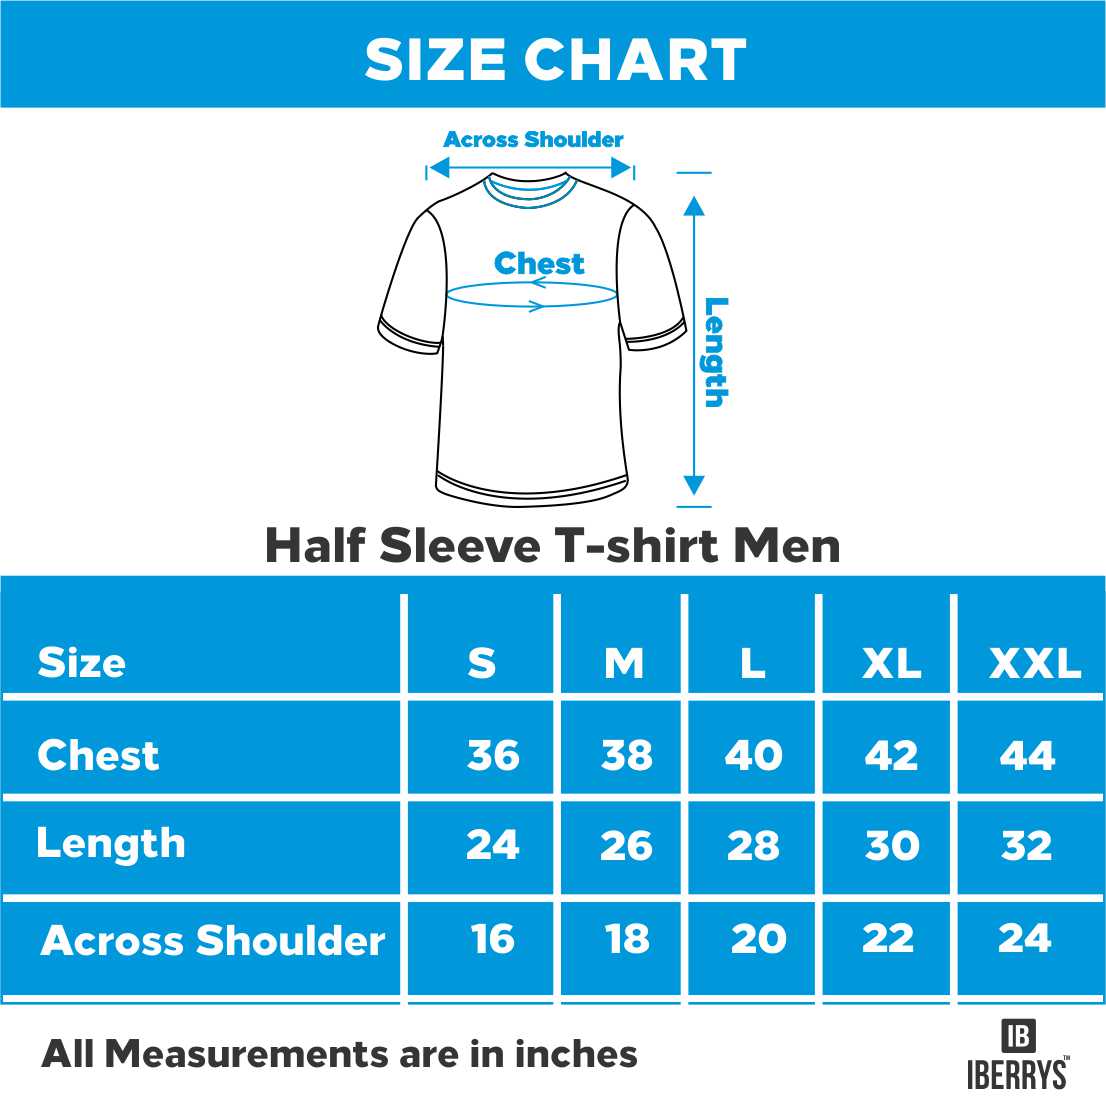 Daddy 2021 Loading Maternity t shirts for men- Black